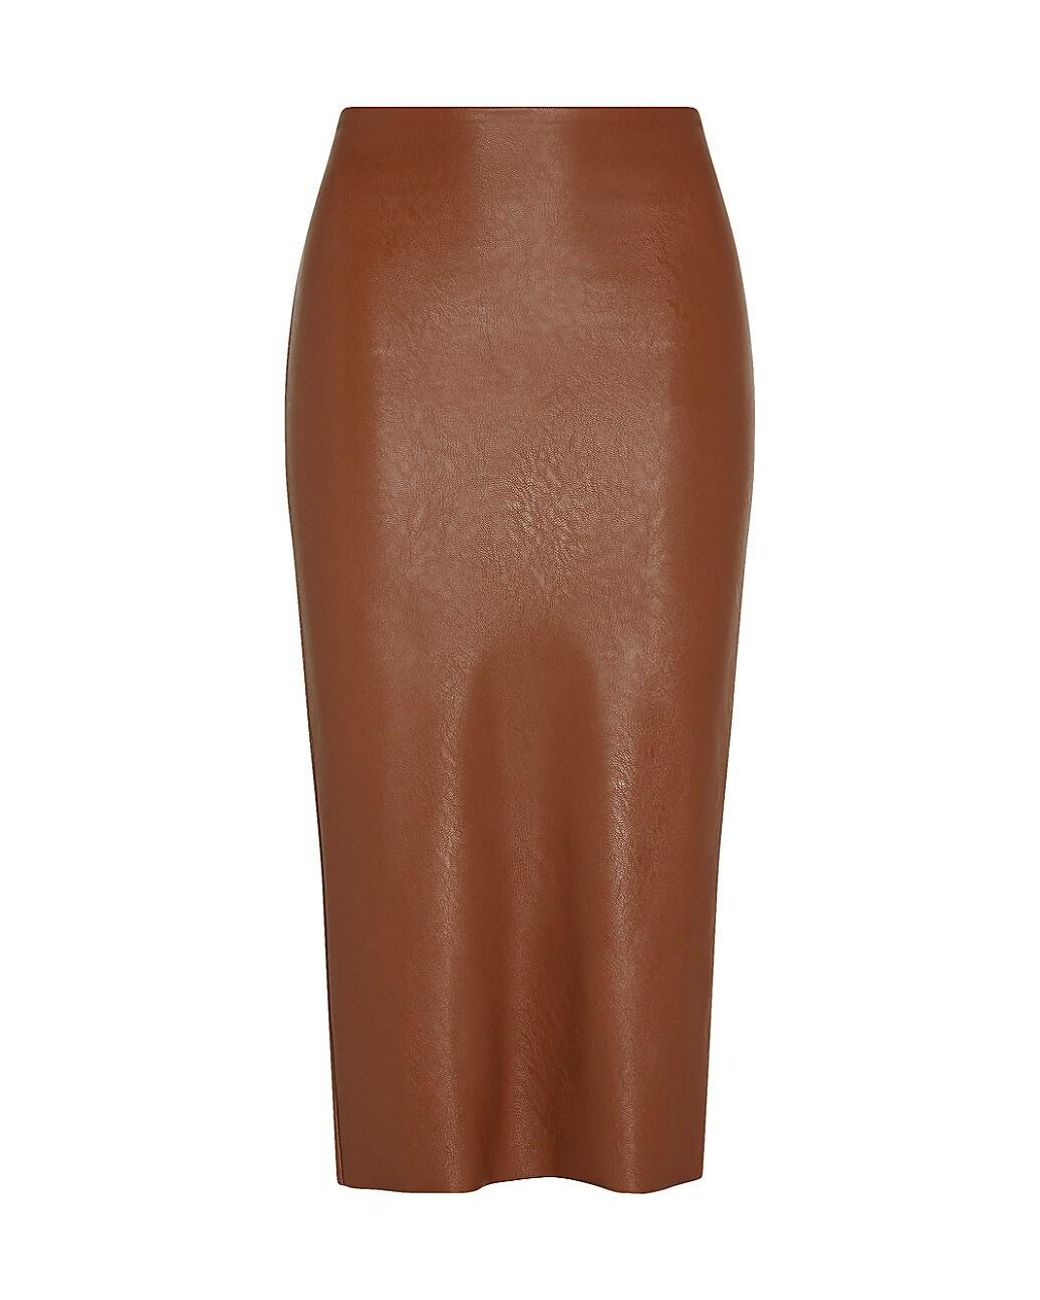 Commando Faux-leather Pencil Skirt in Cocoa (Brown) | Lyst